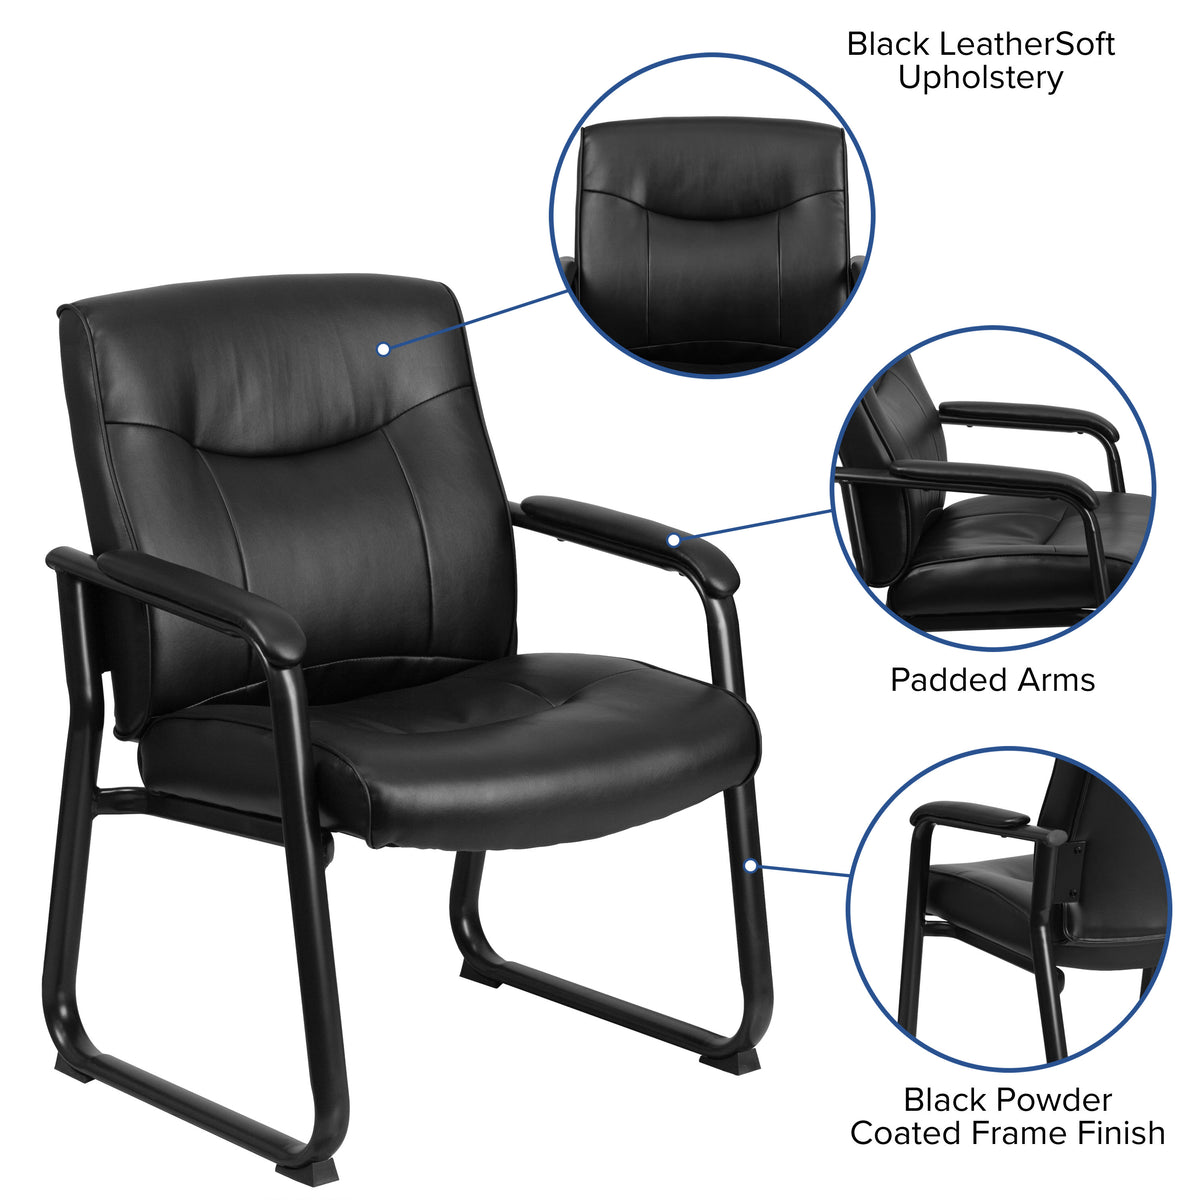 Big & Tall 500 lb. Rated Black LeatherSoft Executive Reception Chair-Sled Base